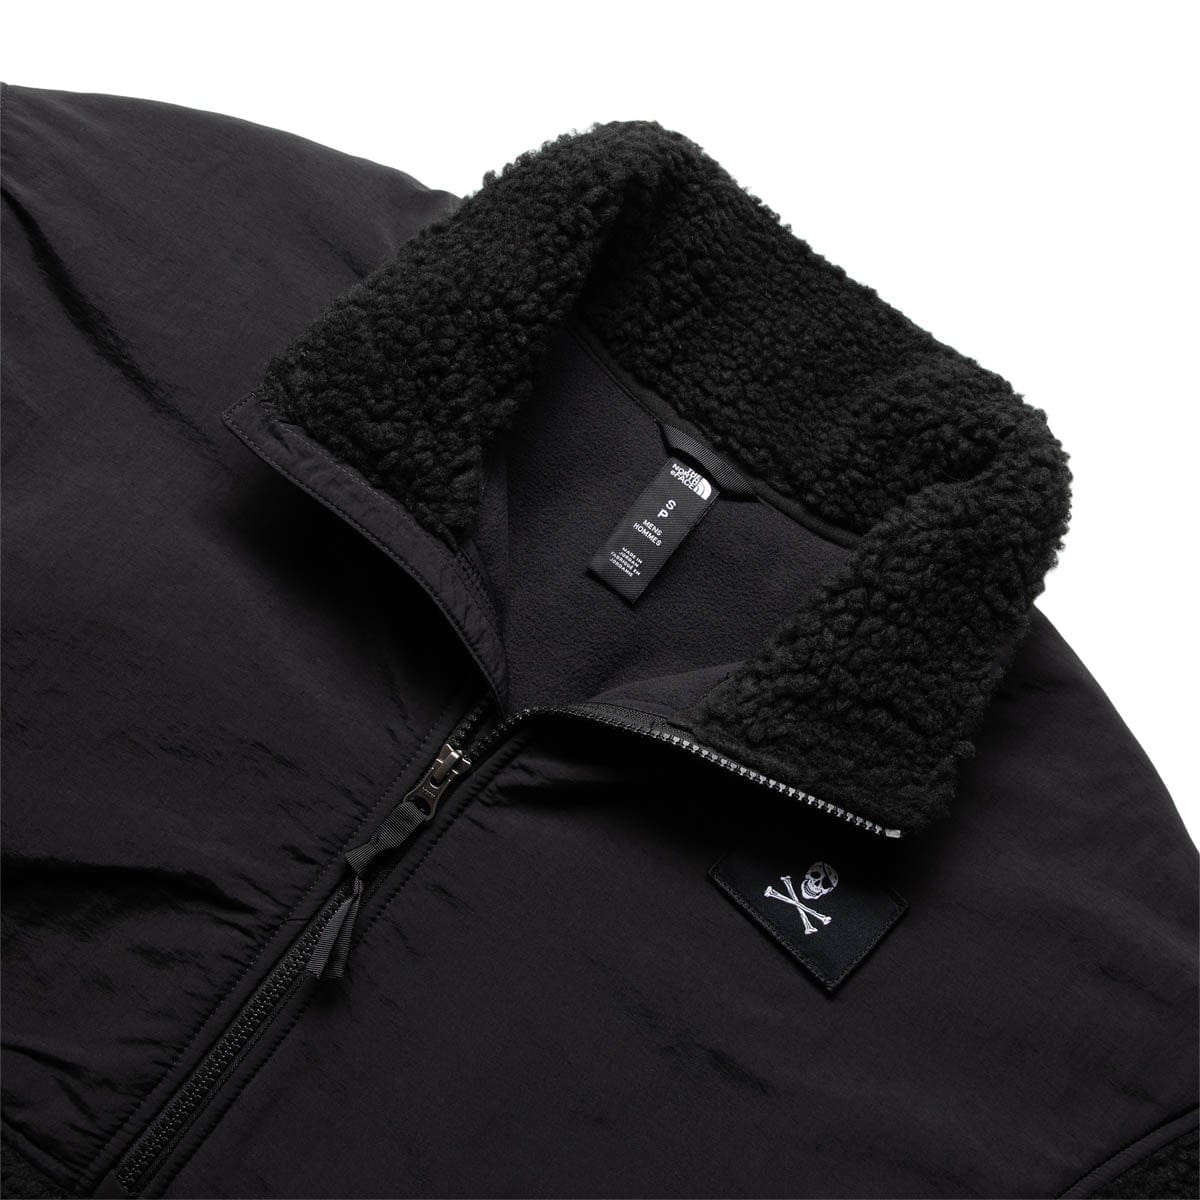 The North Face Outerwear CONRADS FLAG PLATTE SHERPA 1/4 ZIP